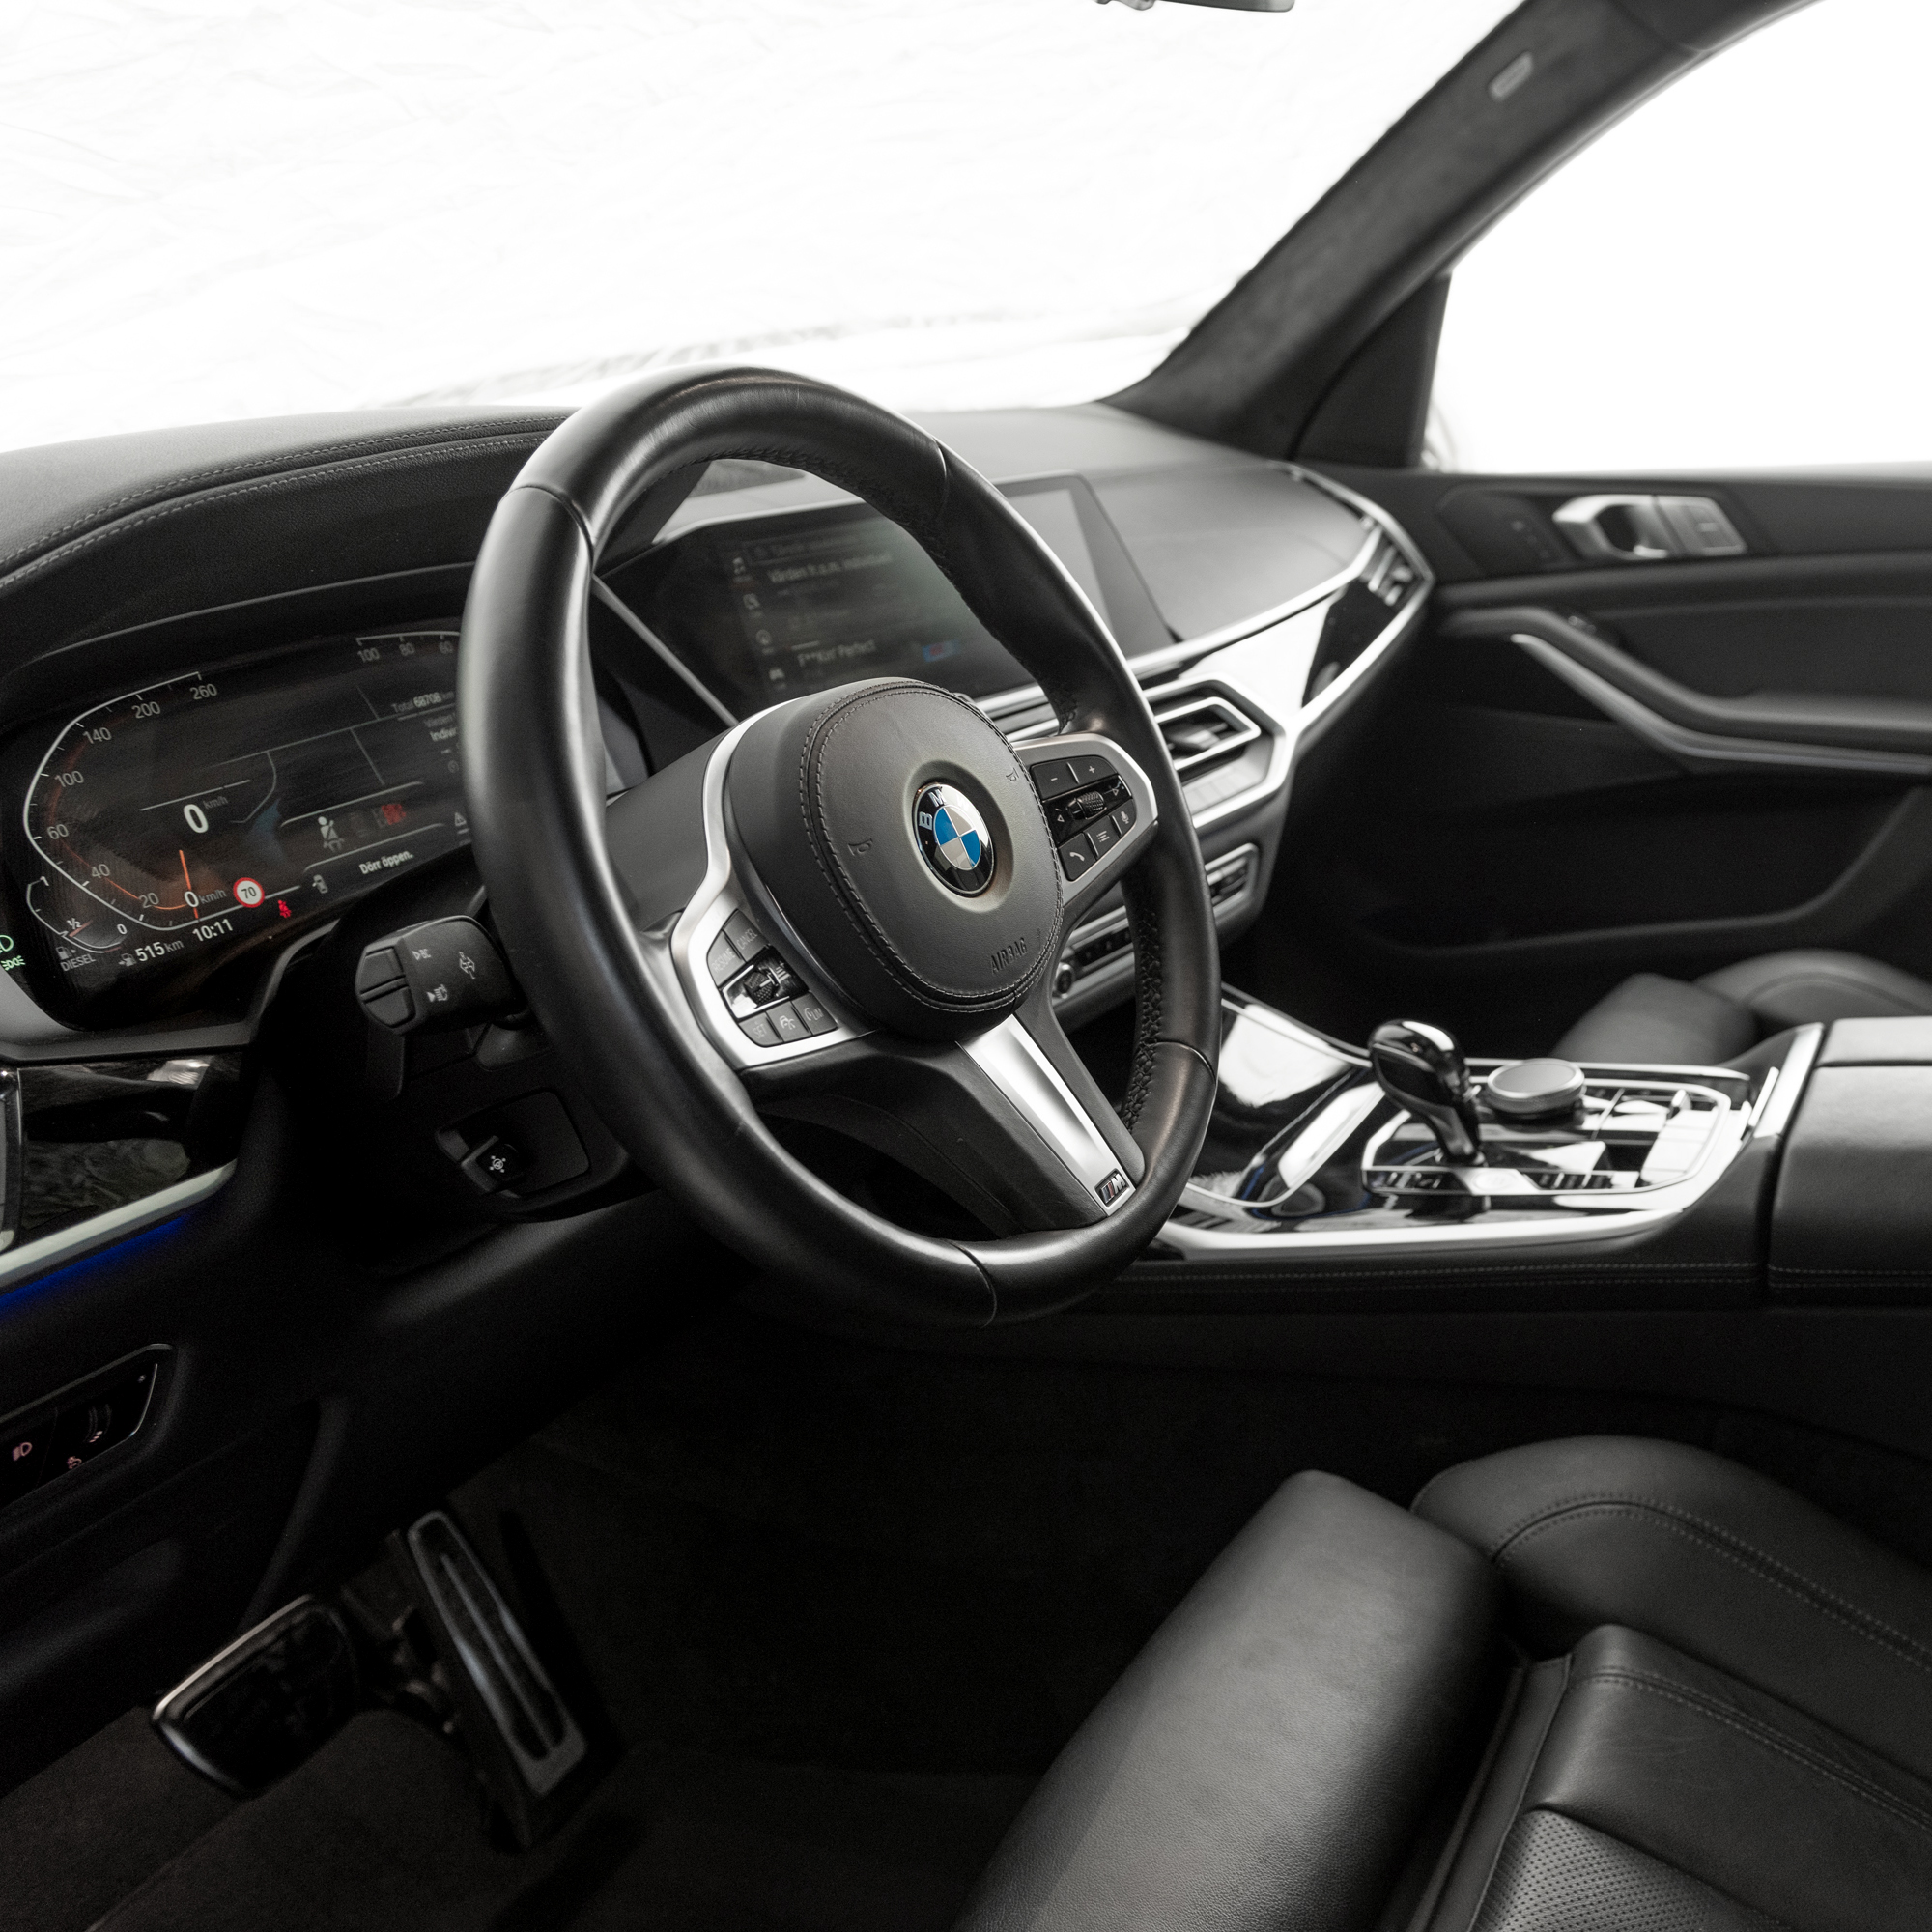 Interior picture of a BMW X7